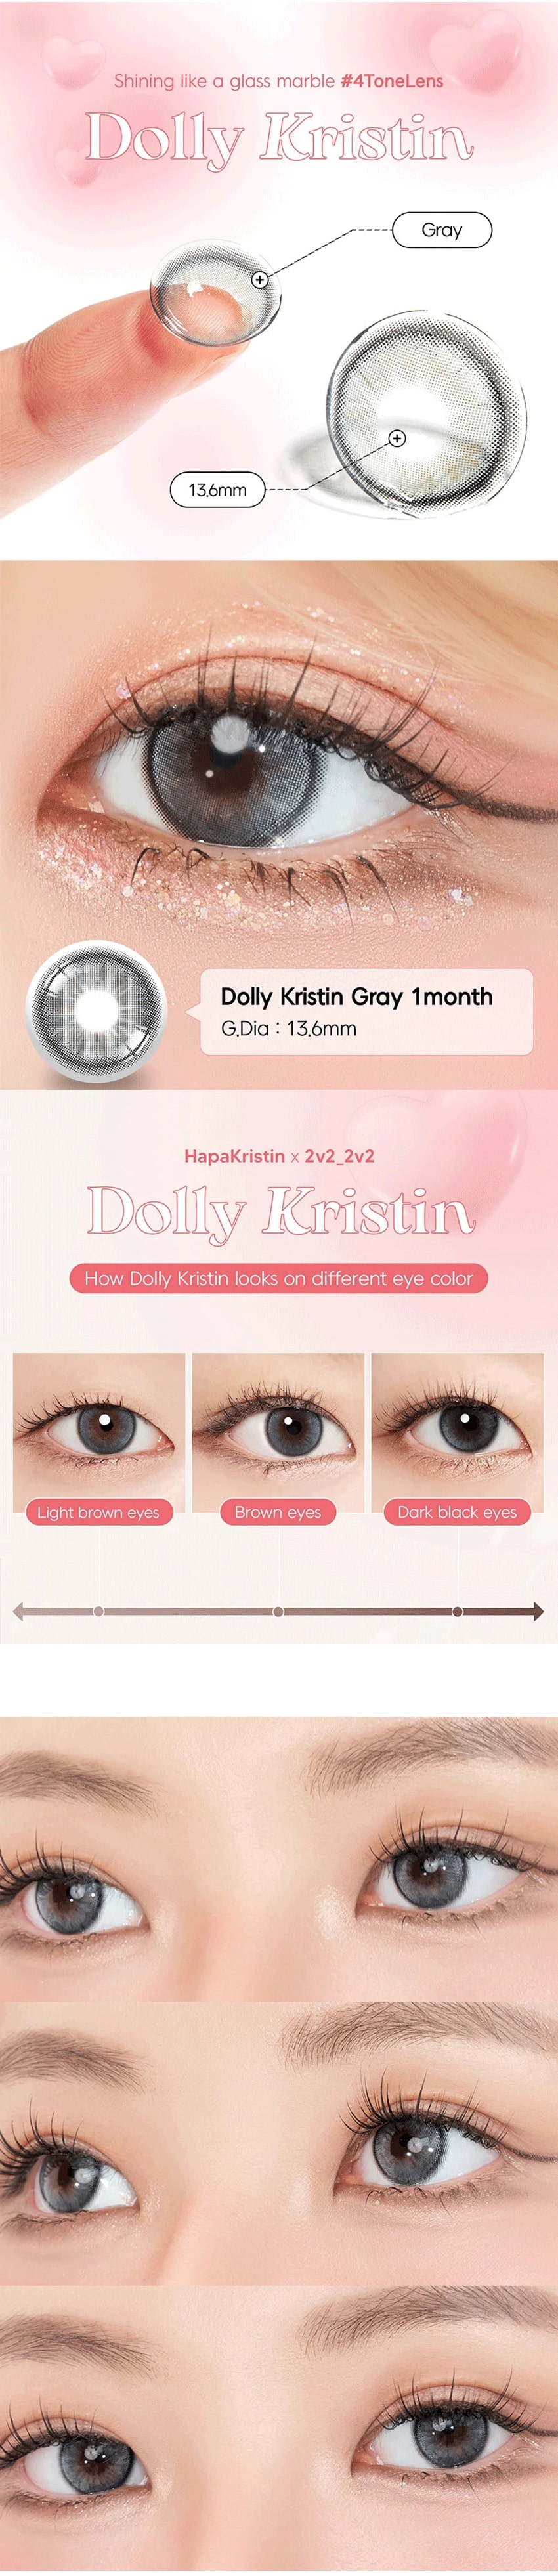  queenslens, queencontacts,dolly,dollygray,graycontacts,hapakristin,kristin